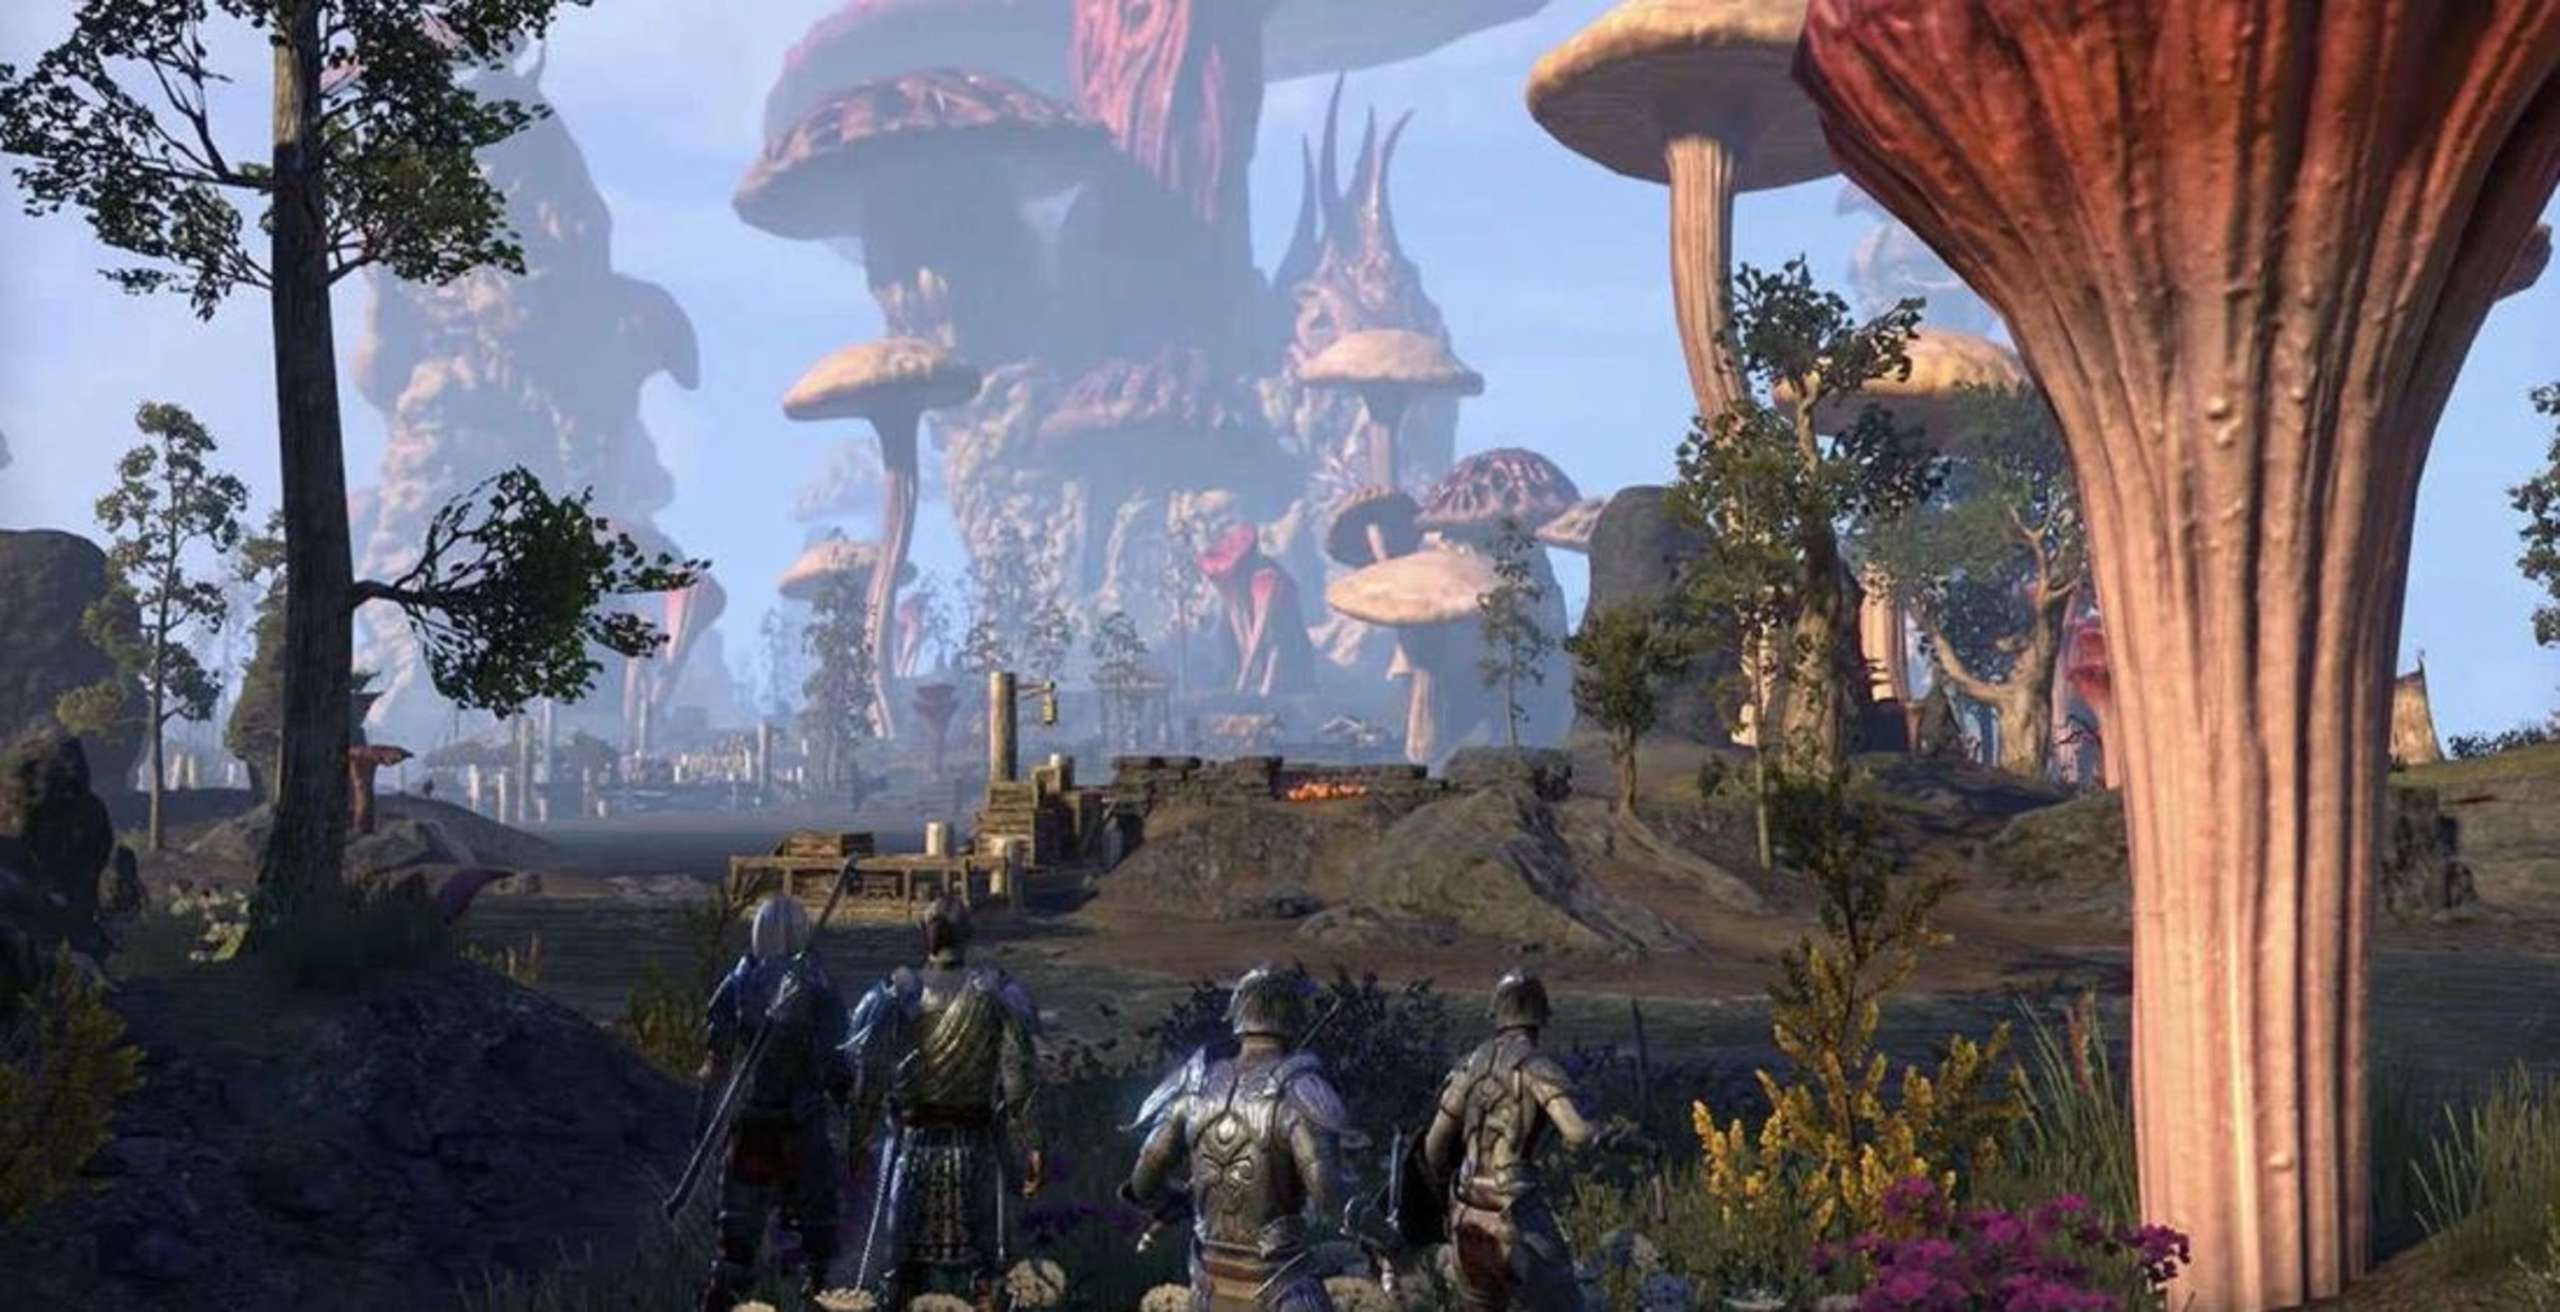 The Third Elder Scrolls Video Game, Which Served As The Model For The Morrowind Chapter Of Elder Scrolls Online, Is Referenced And Alluded To Frequently